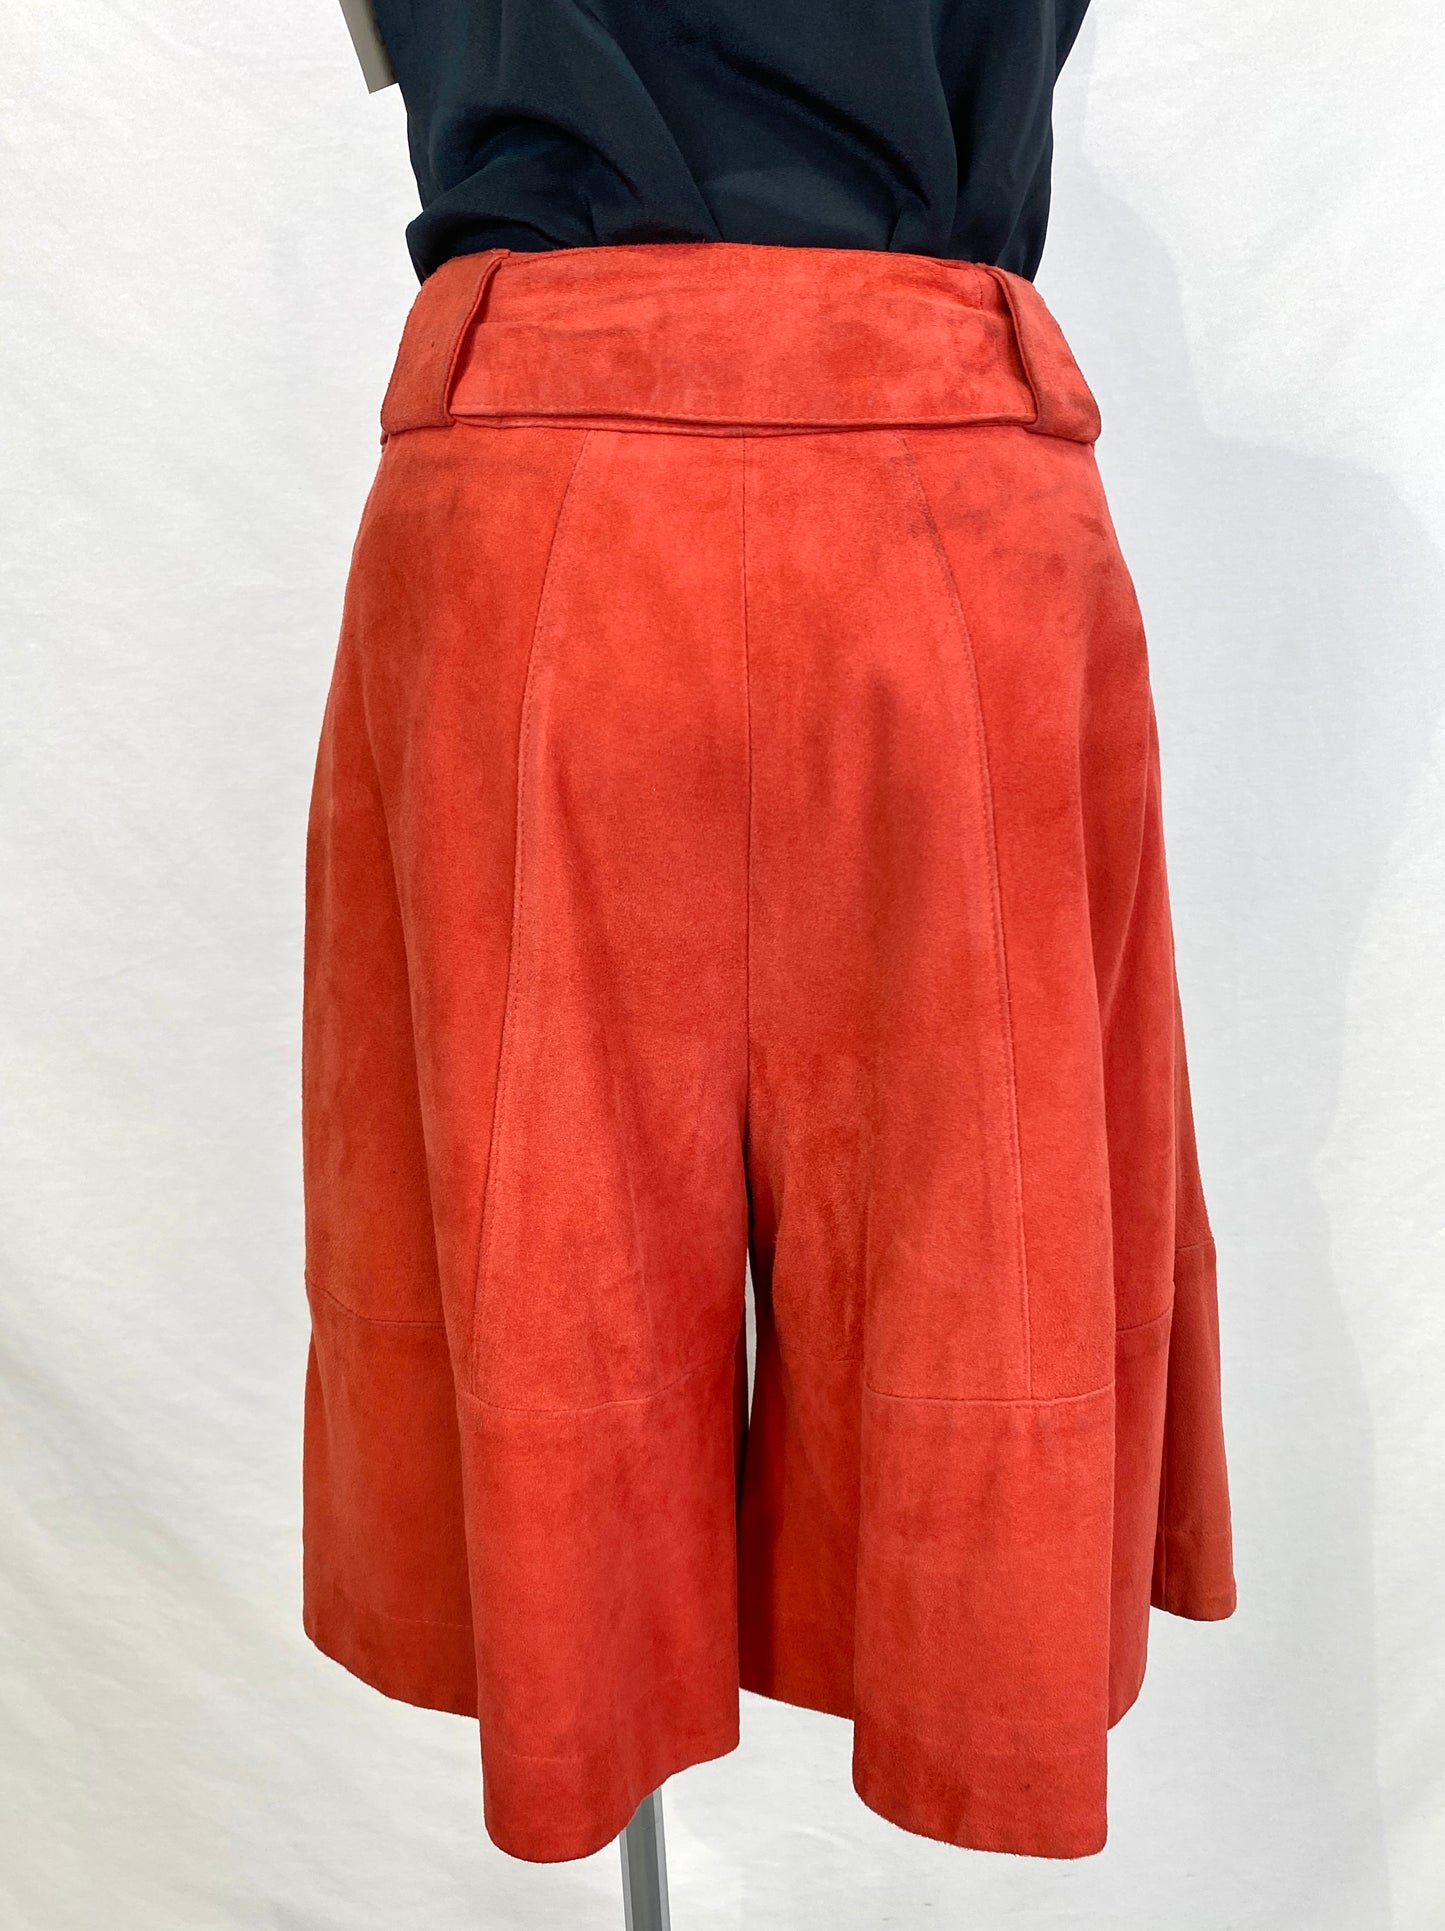 Back view of 90s Rust leather shorts, no pockets. Ian Drummond Vintage. 